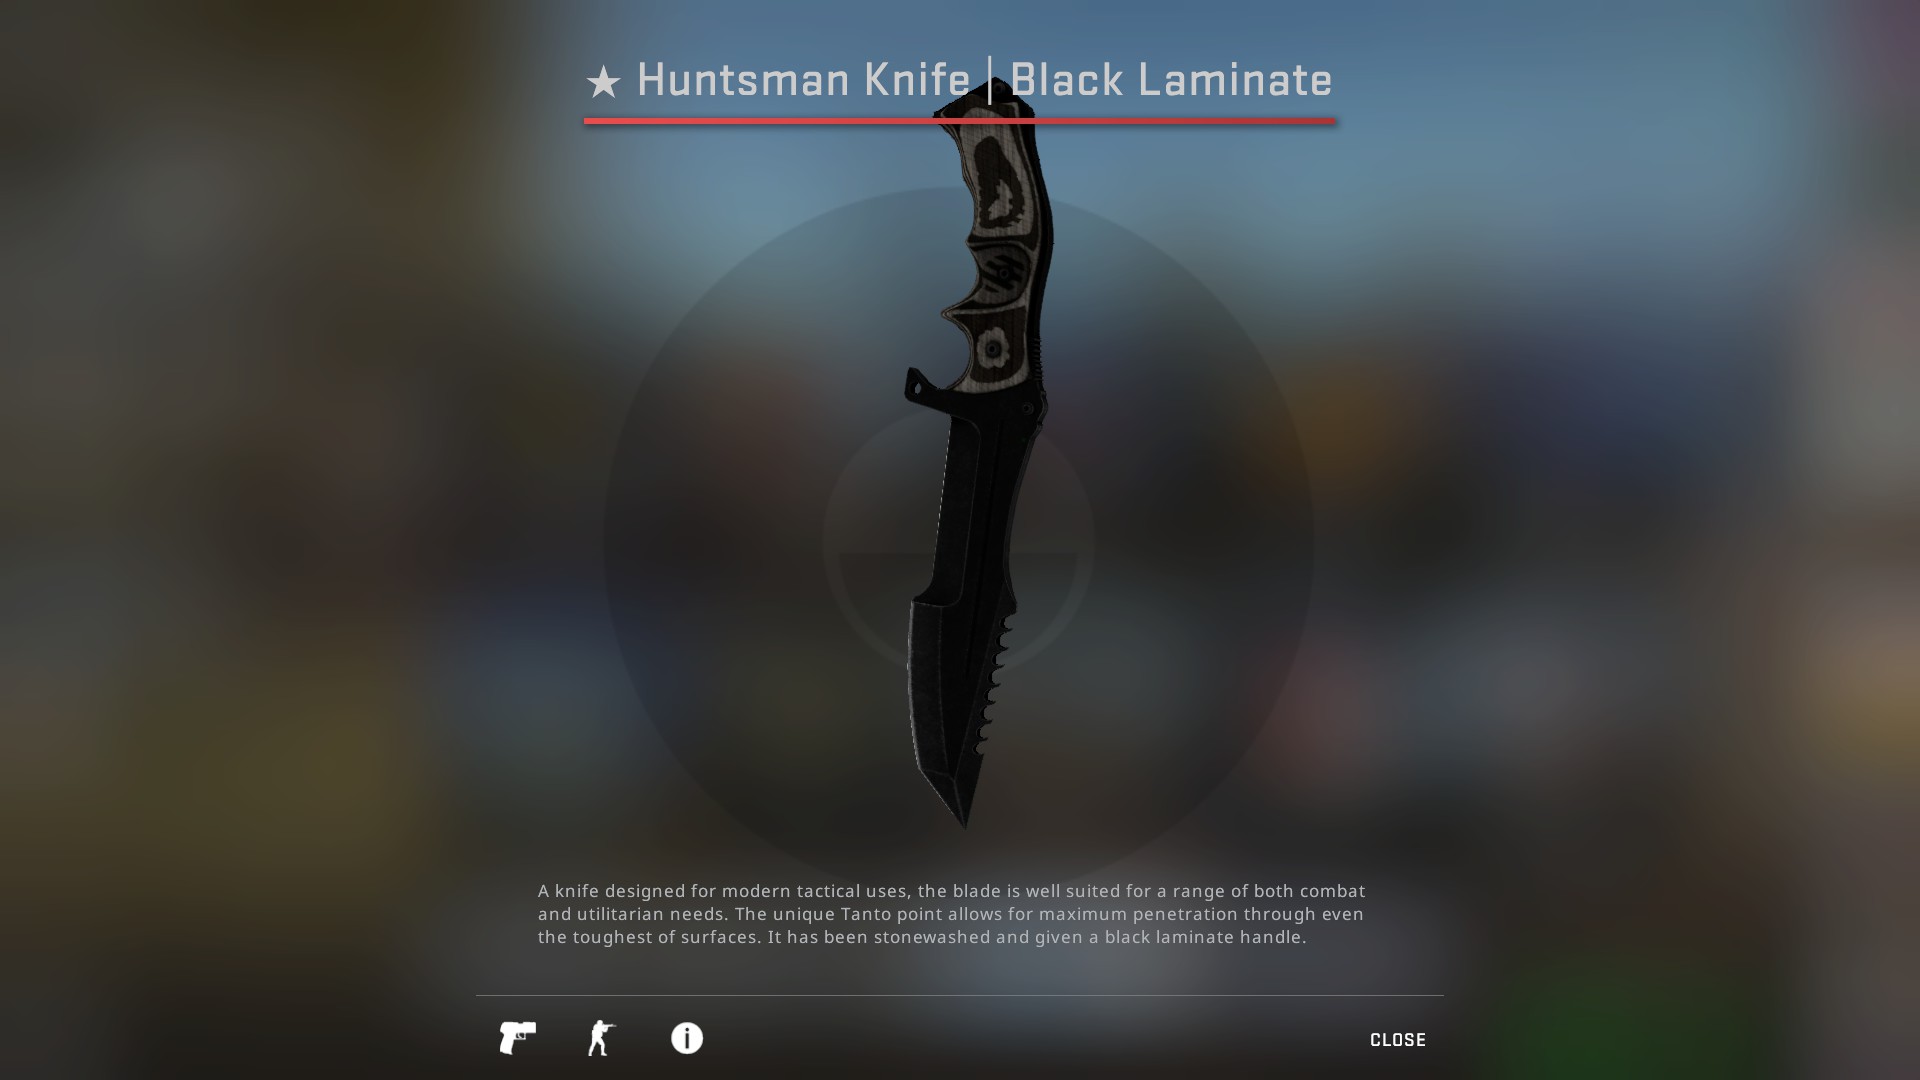 powek on Twitter: "Aren't new black laminate knives a little bit too dark? Here is example, both knives are Factory New. Huntsman still looks like a bugged knife... https://t.co/GHsHp4dyM2" Twitter